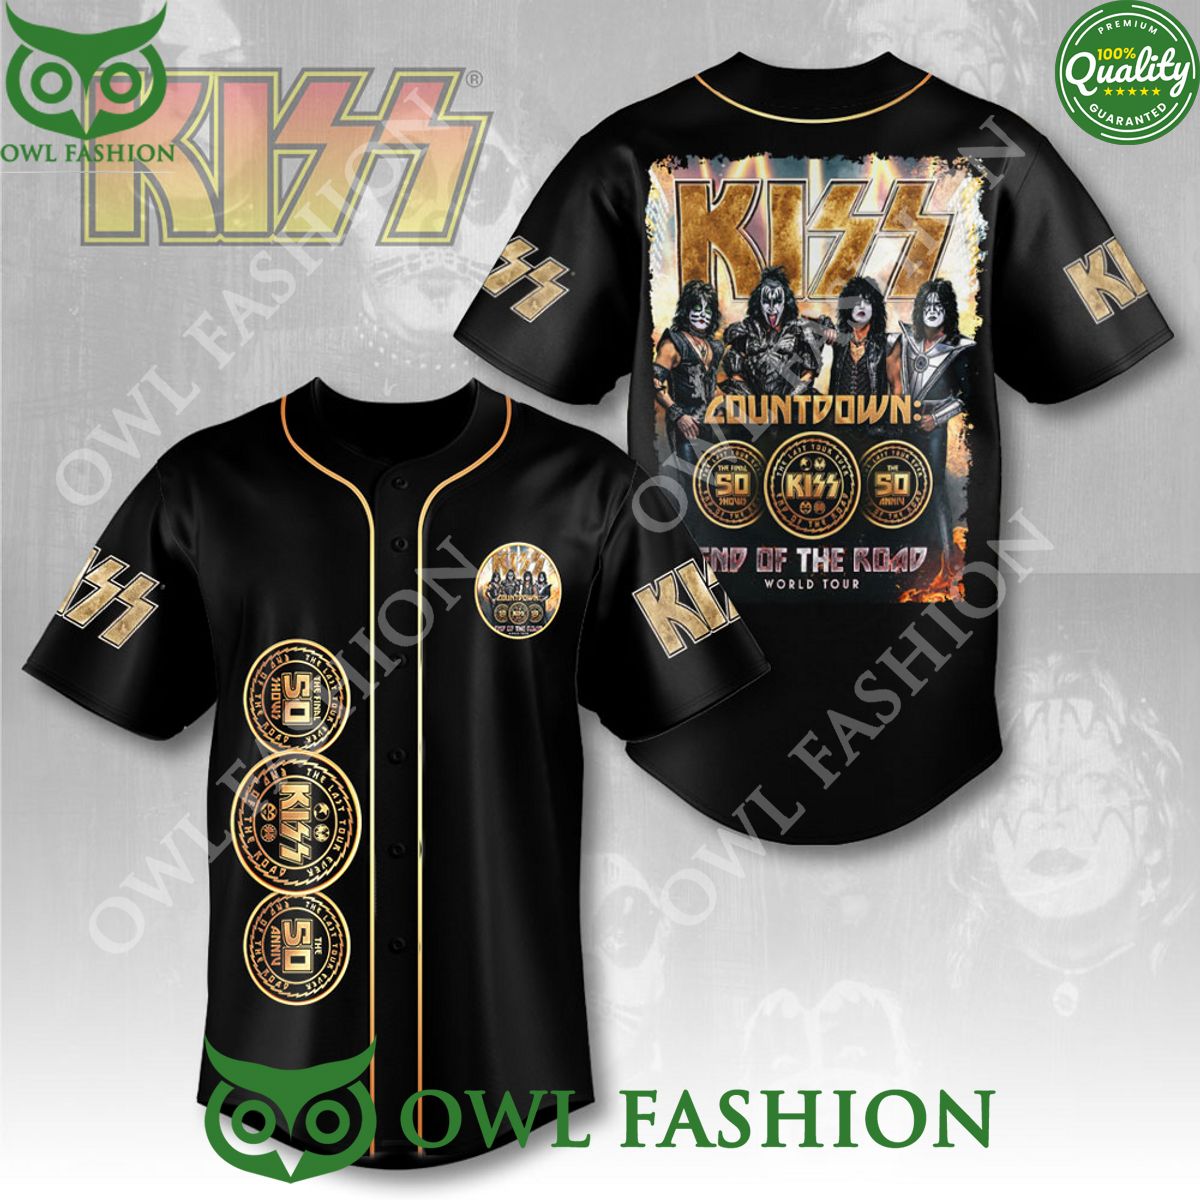 kiss band end of the road countdown limited baseball jersey 1 EvPao.jpg